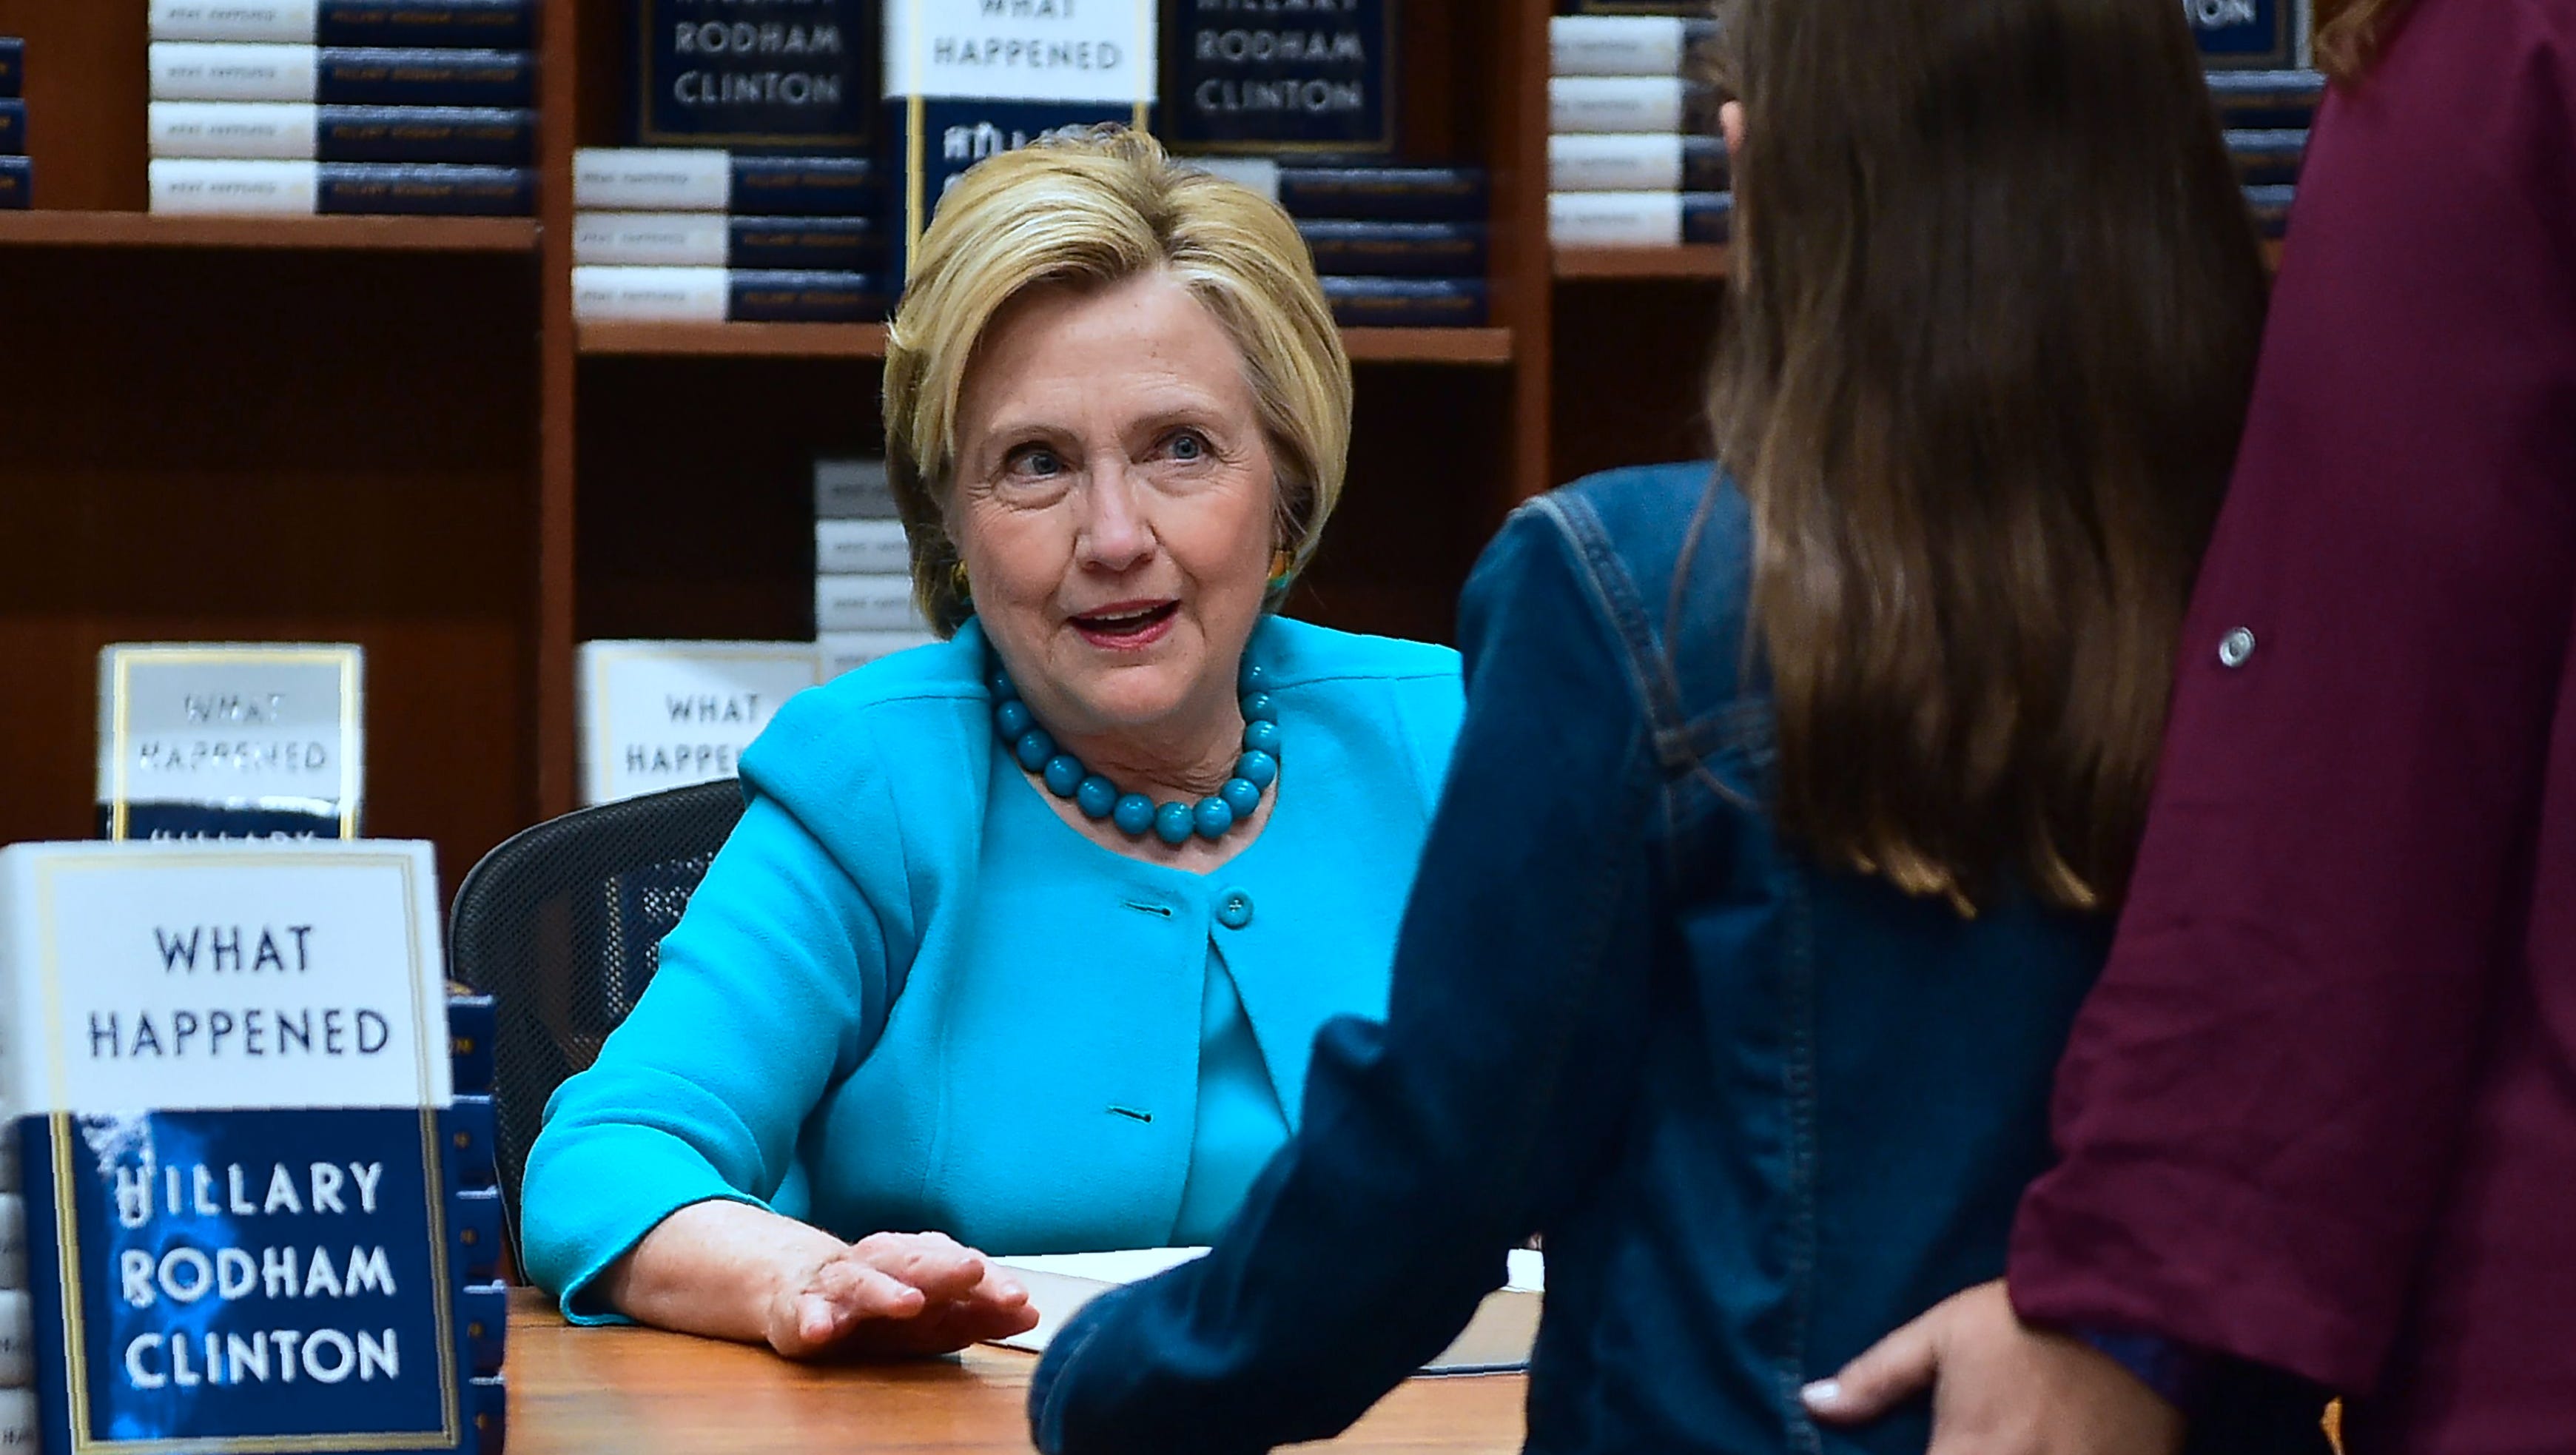 Hillary Clinton greets a supporter getting a signed copy of Clinton